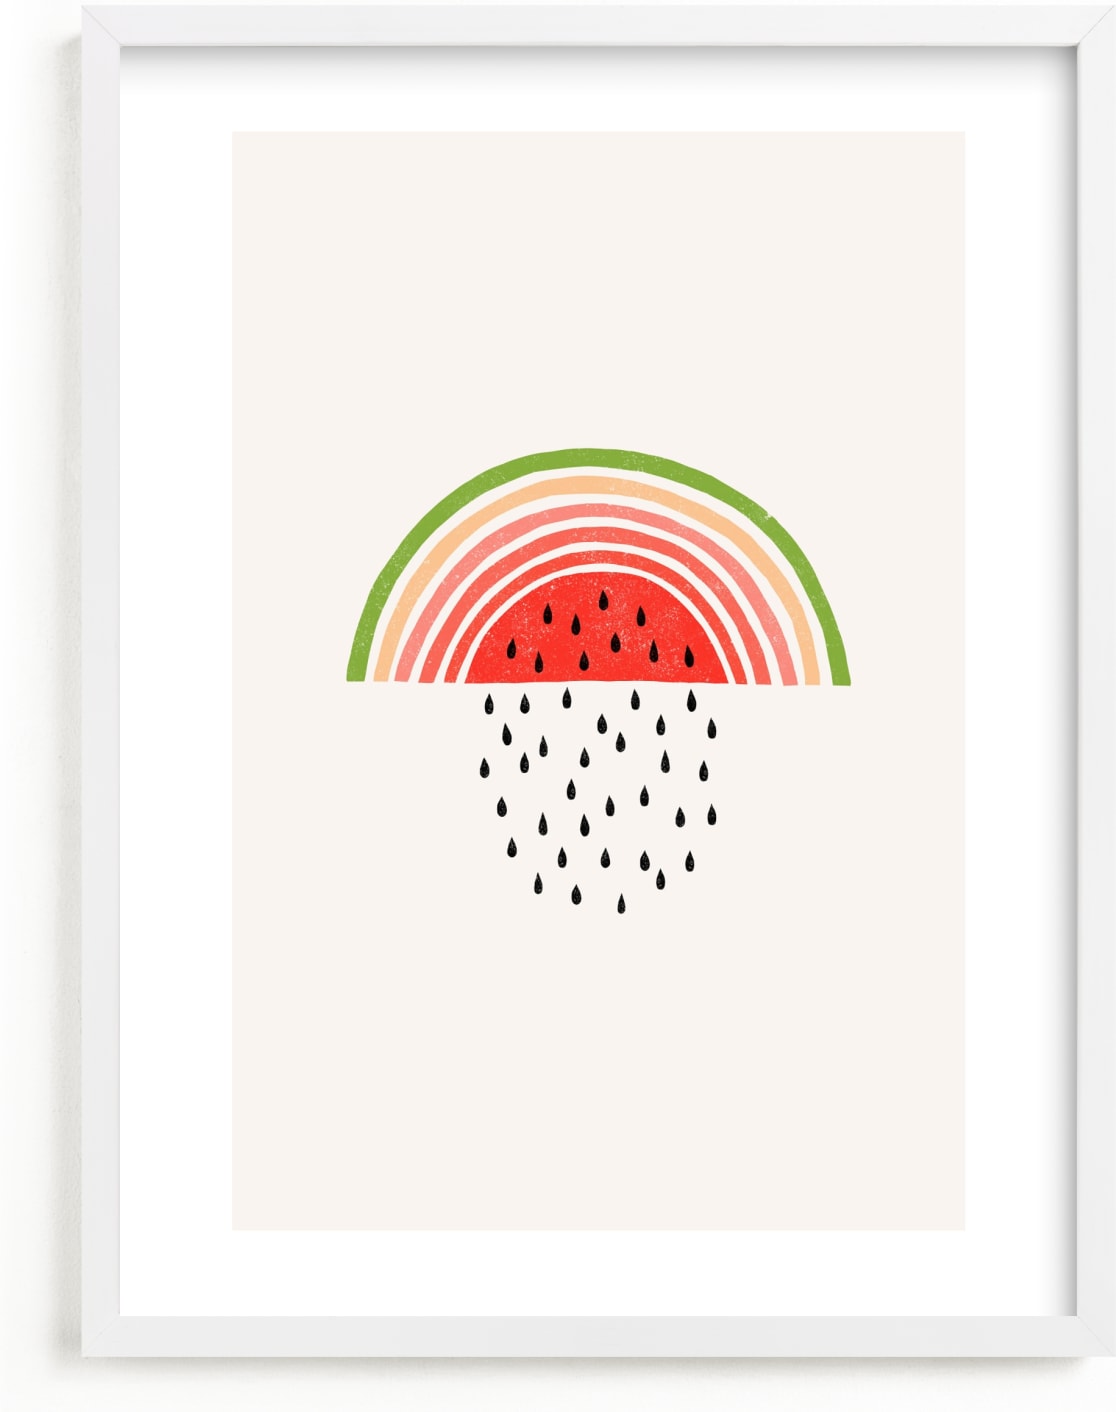 This is a colorful nursery wall art by Anda Safta called Watermelon Rainbow .